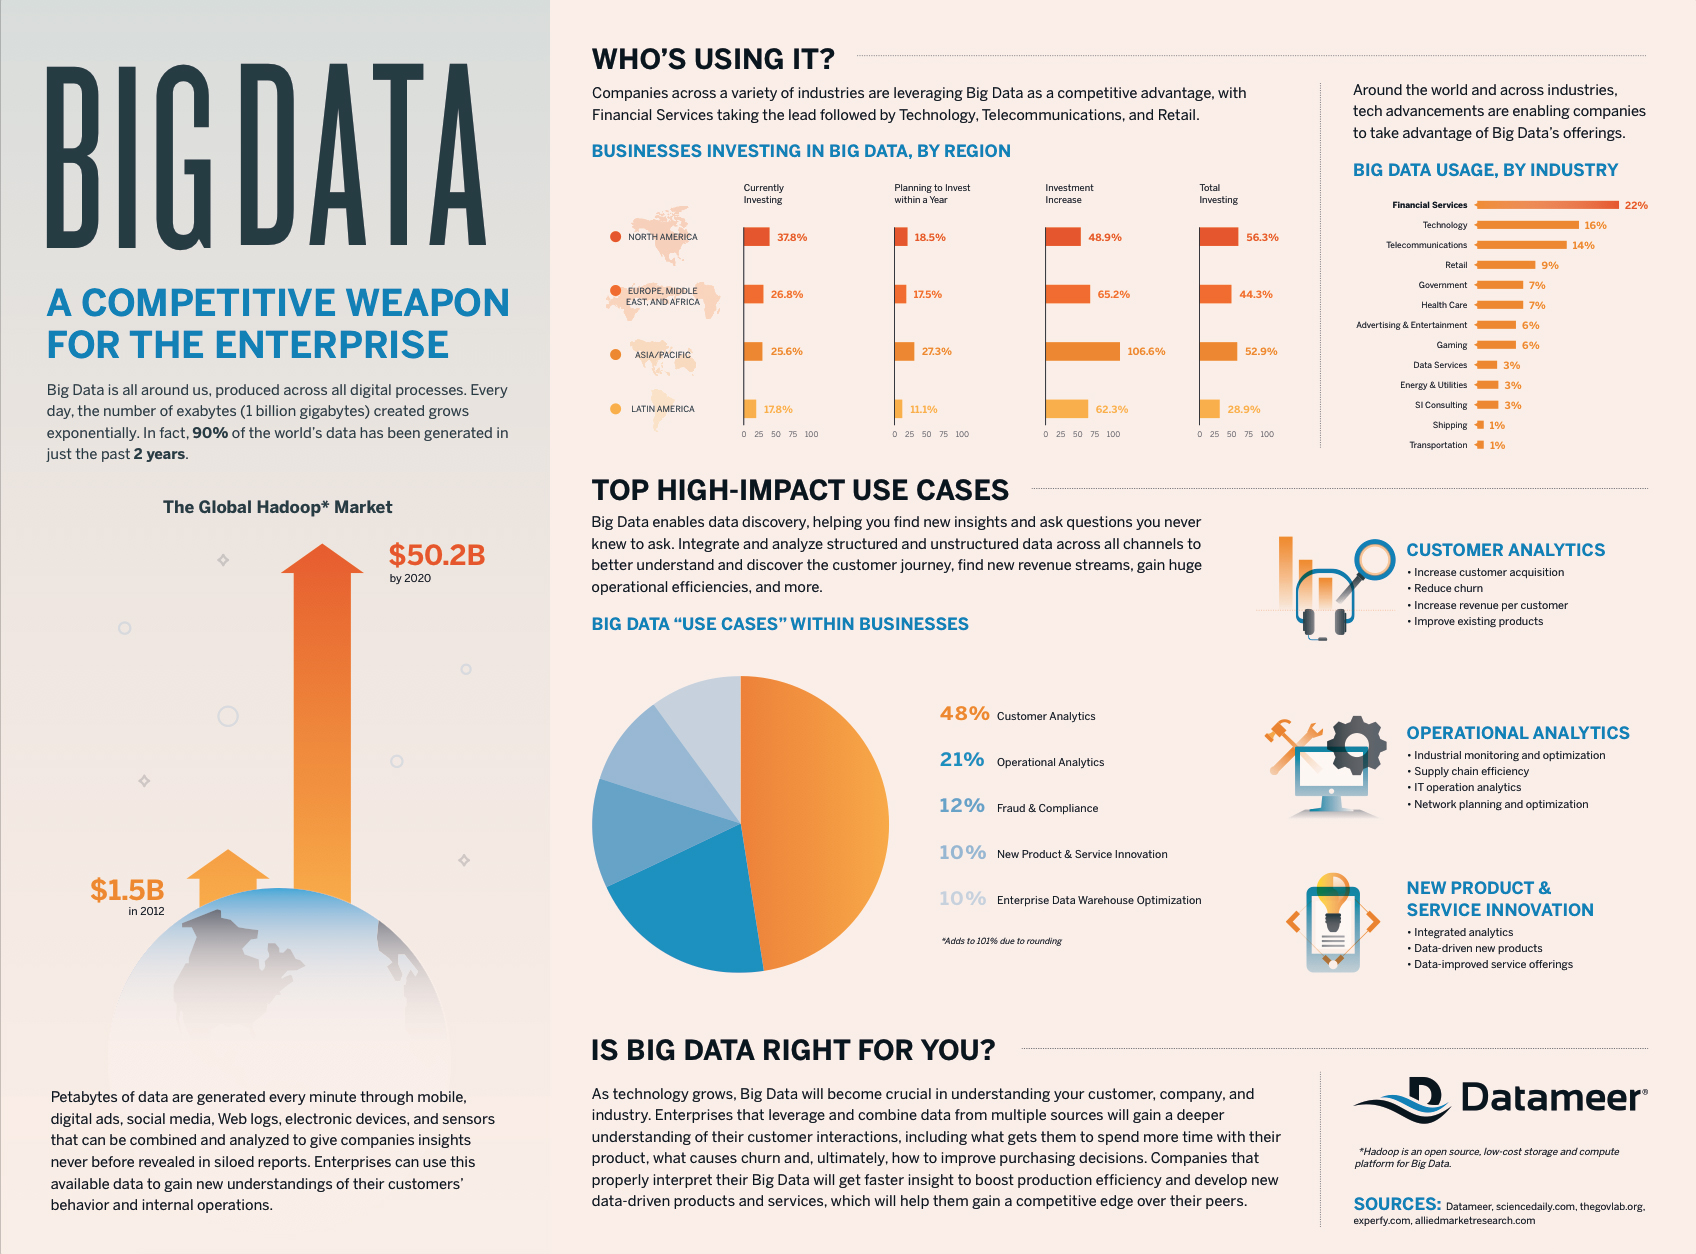 The Future Of Big Data - 5 Dimensions - with Infographic Part 1 - IntelligentHQ